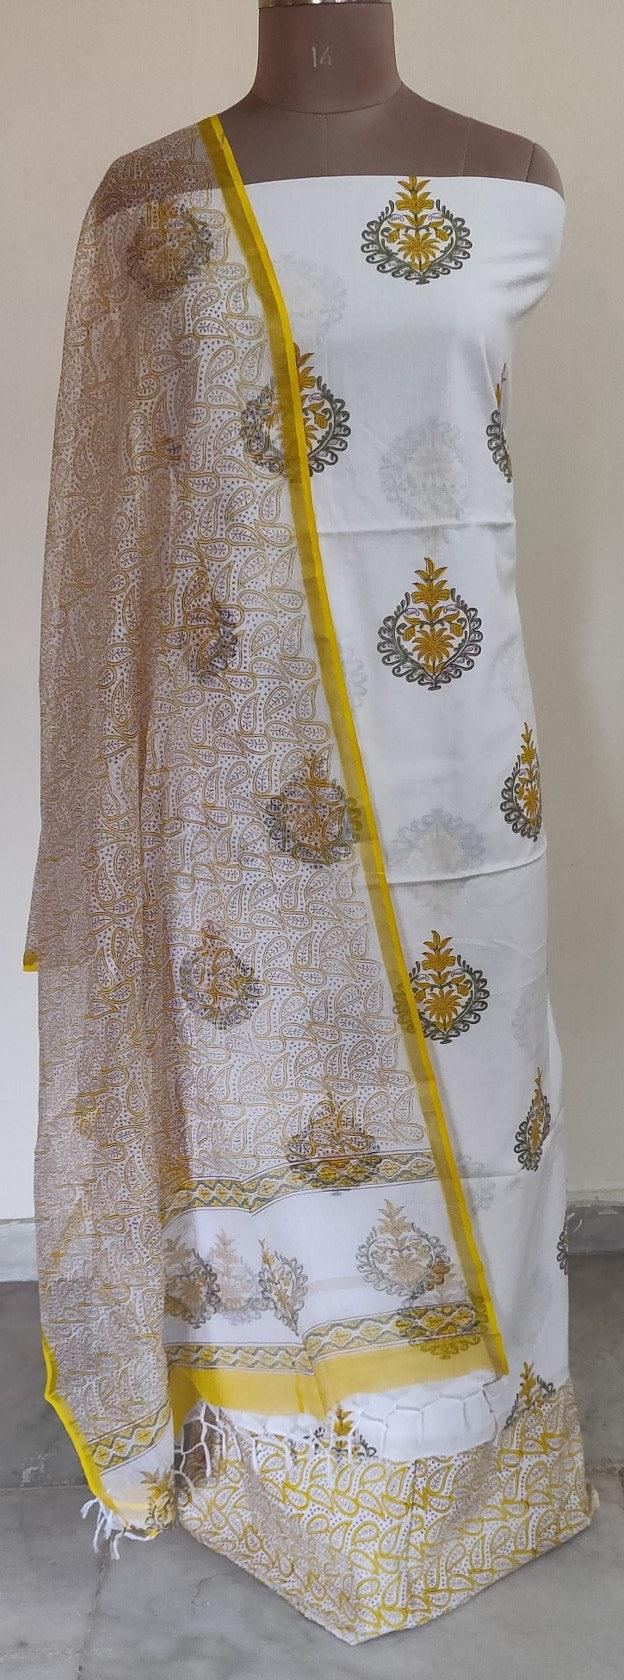 White Block Printed Suit with Kota Dupatta BPK26 - Ethnic's By Anvi Creations